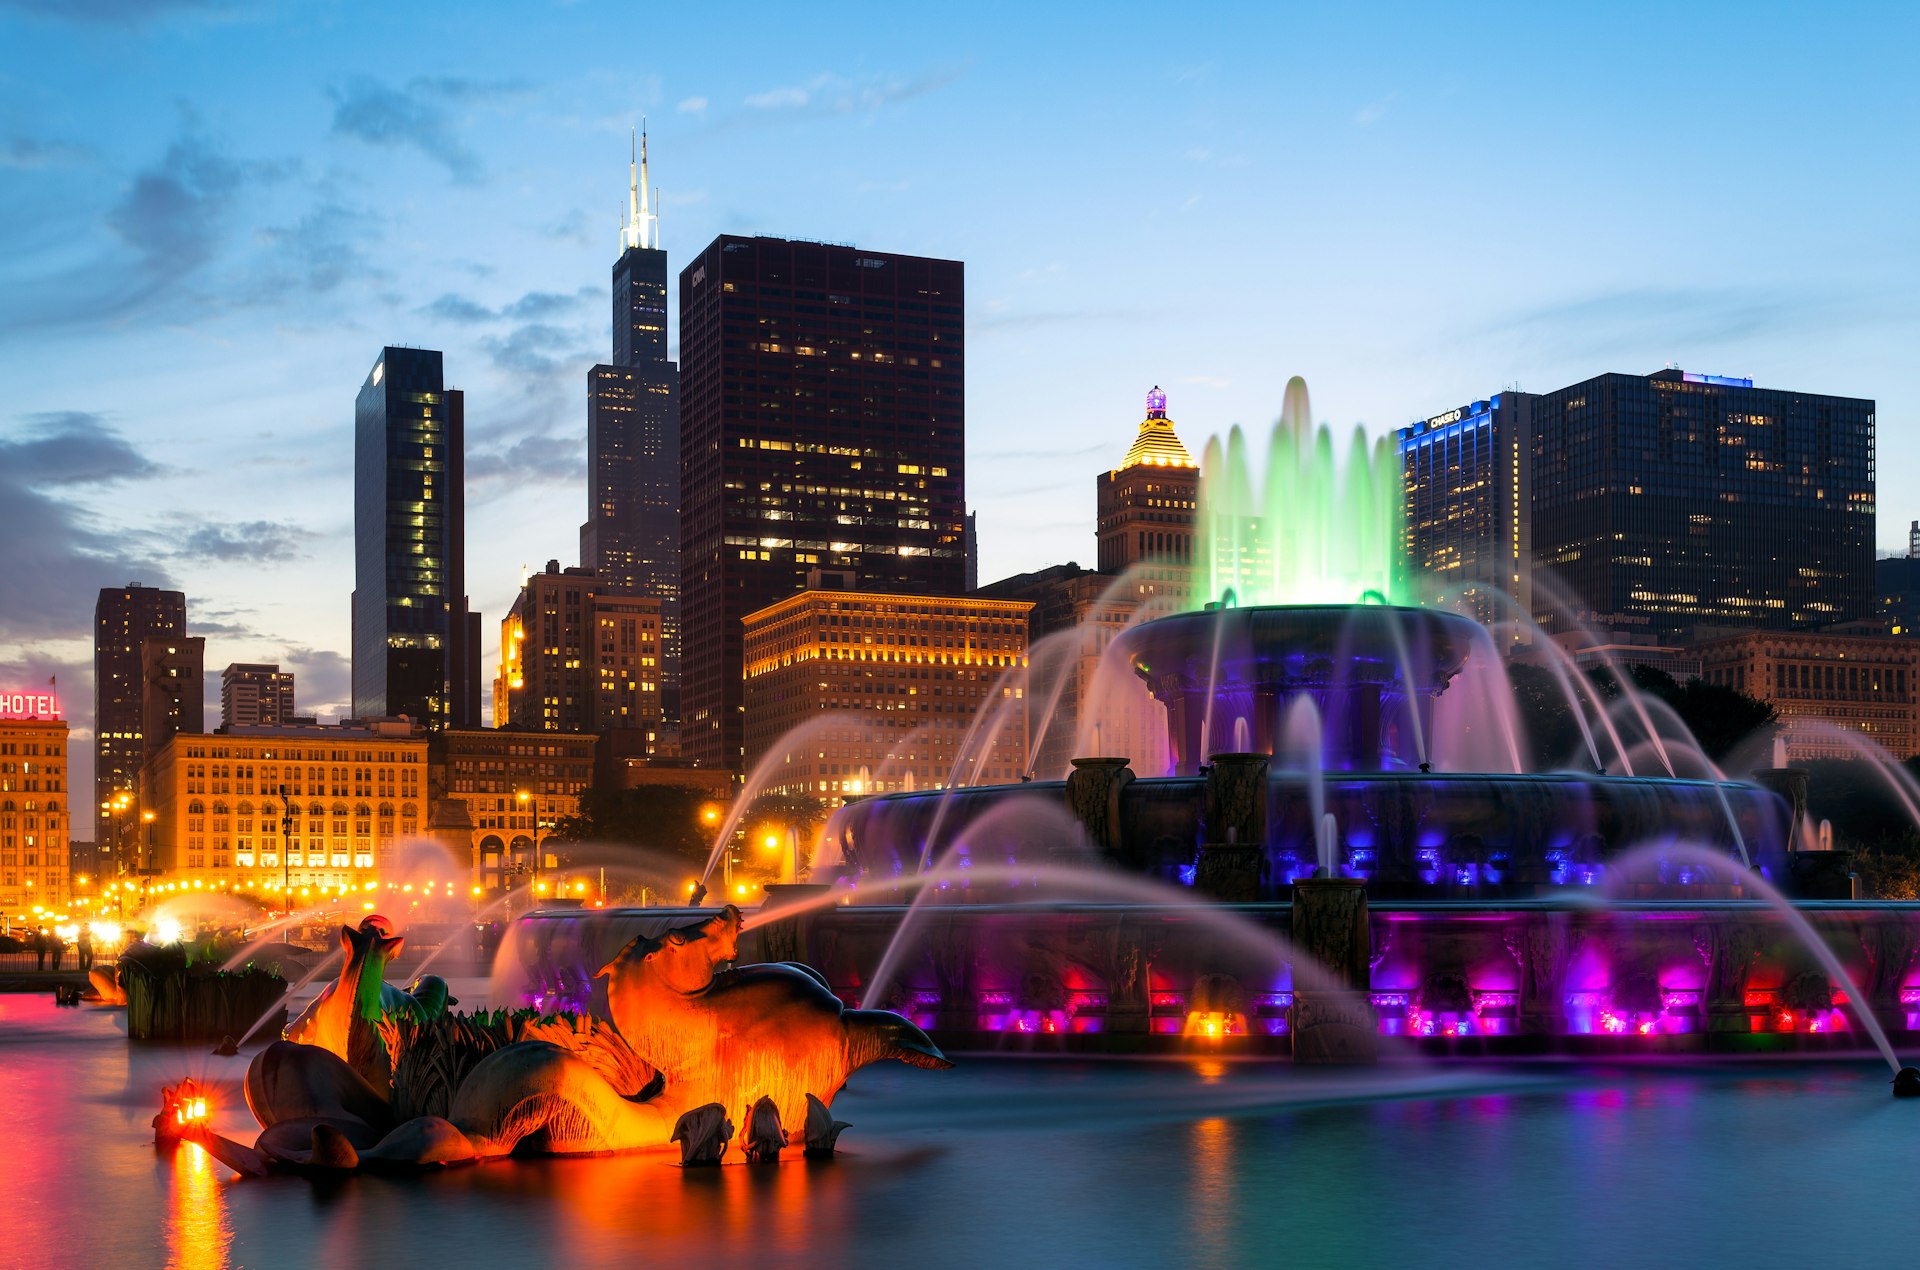 Buckingham Fountain in Chicago's Grant Park at night